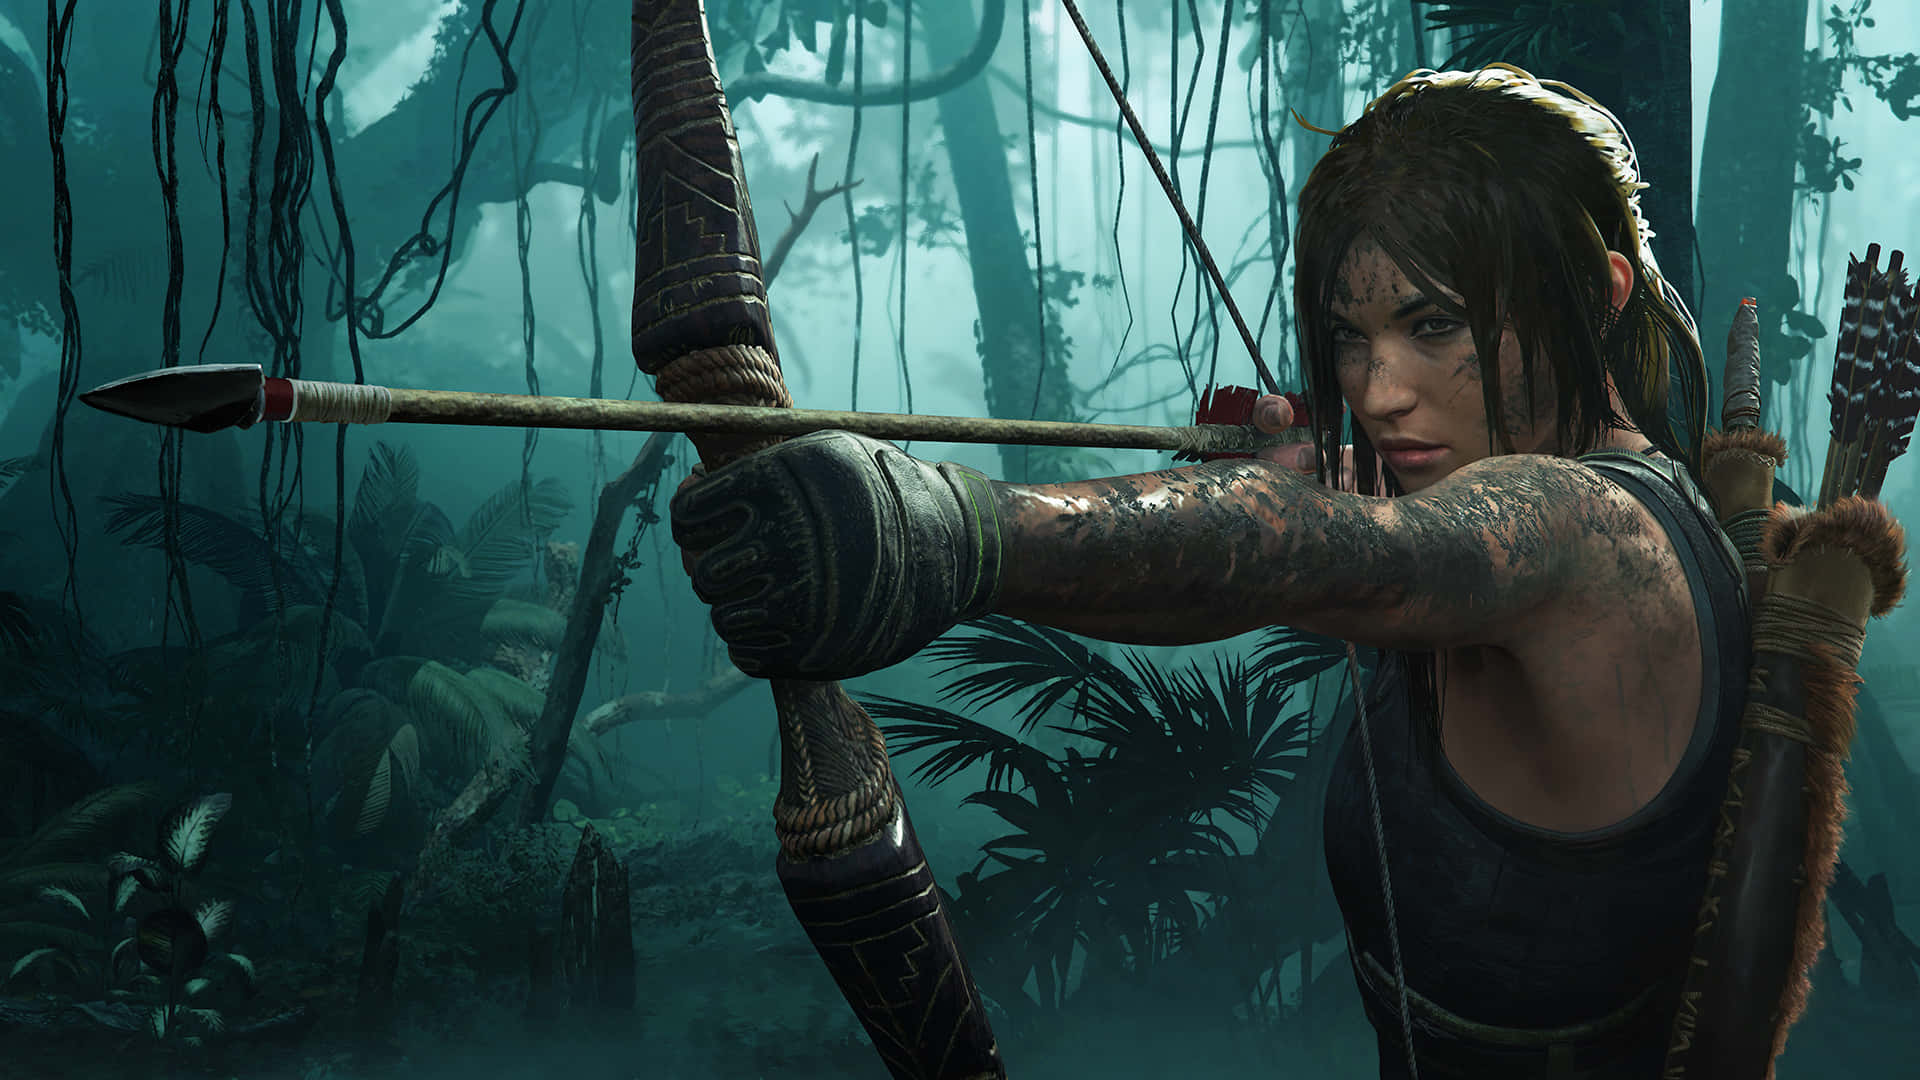 Uncover the mysteries within the ruins of Shadow of the Tomb Raider Wallpaper